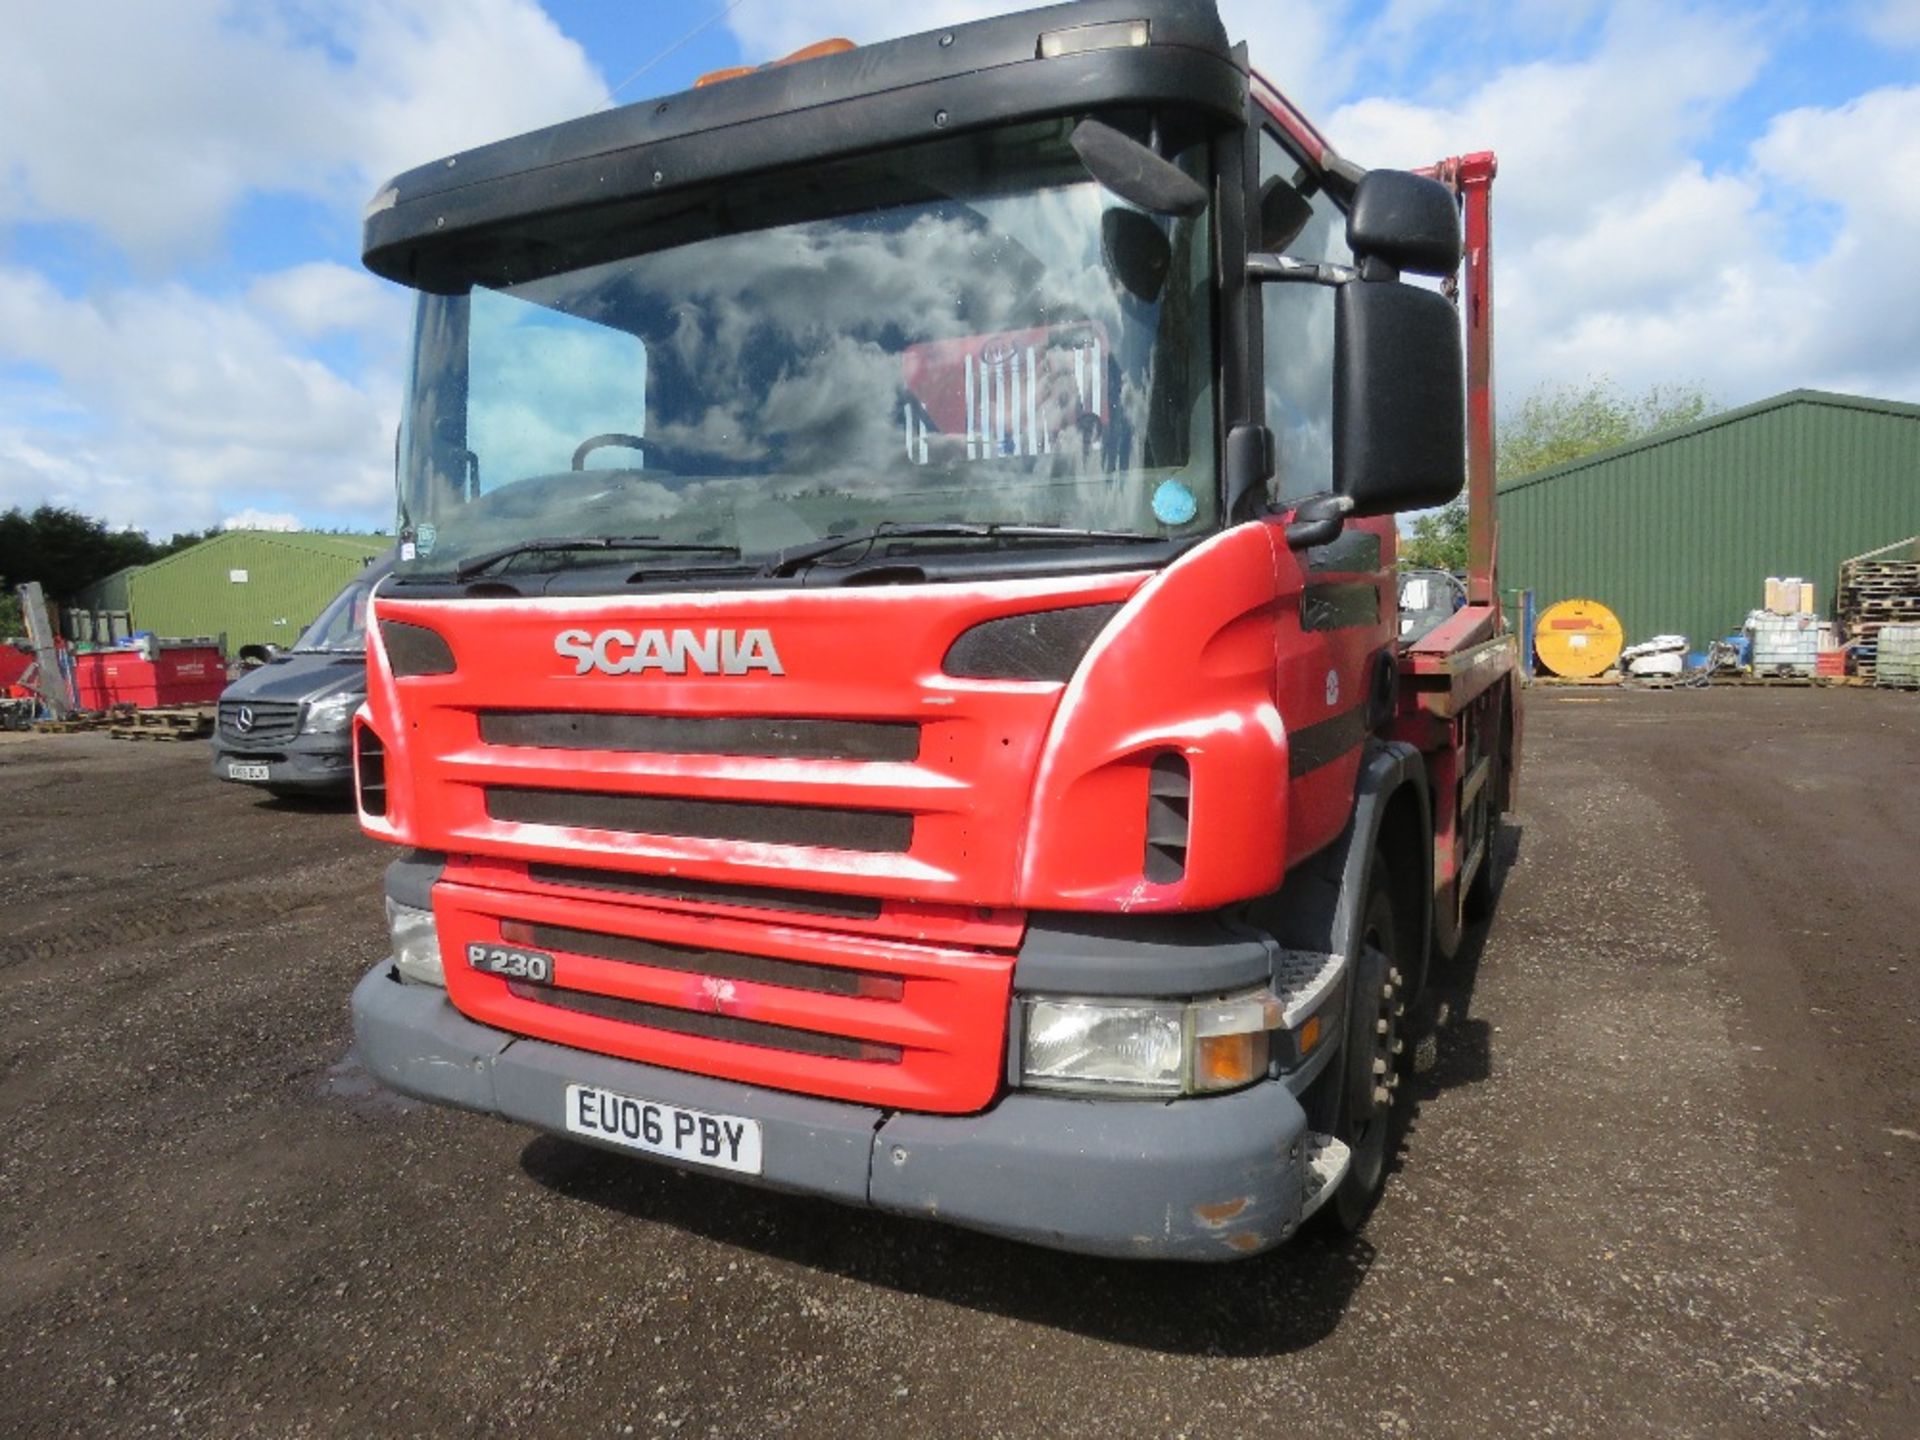 SCANIA P230 4X2 CHAIN LIFT SKIP LORRY YEAR 2006. REG:EU06 PBY. 402,445 REC KMS. MANUAL GEARBOX. 18 T - Image 3 of 18